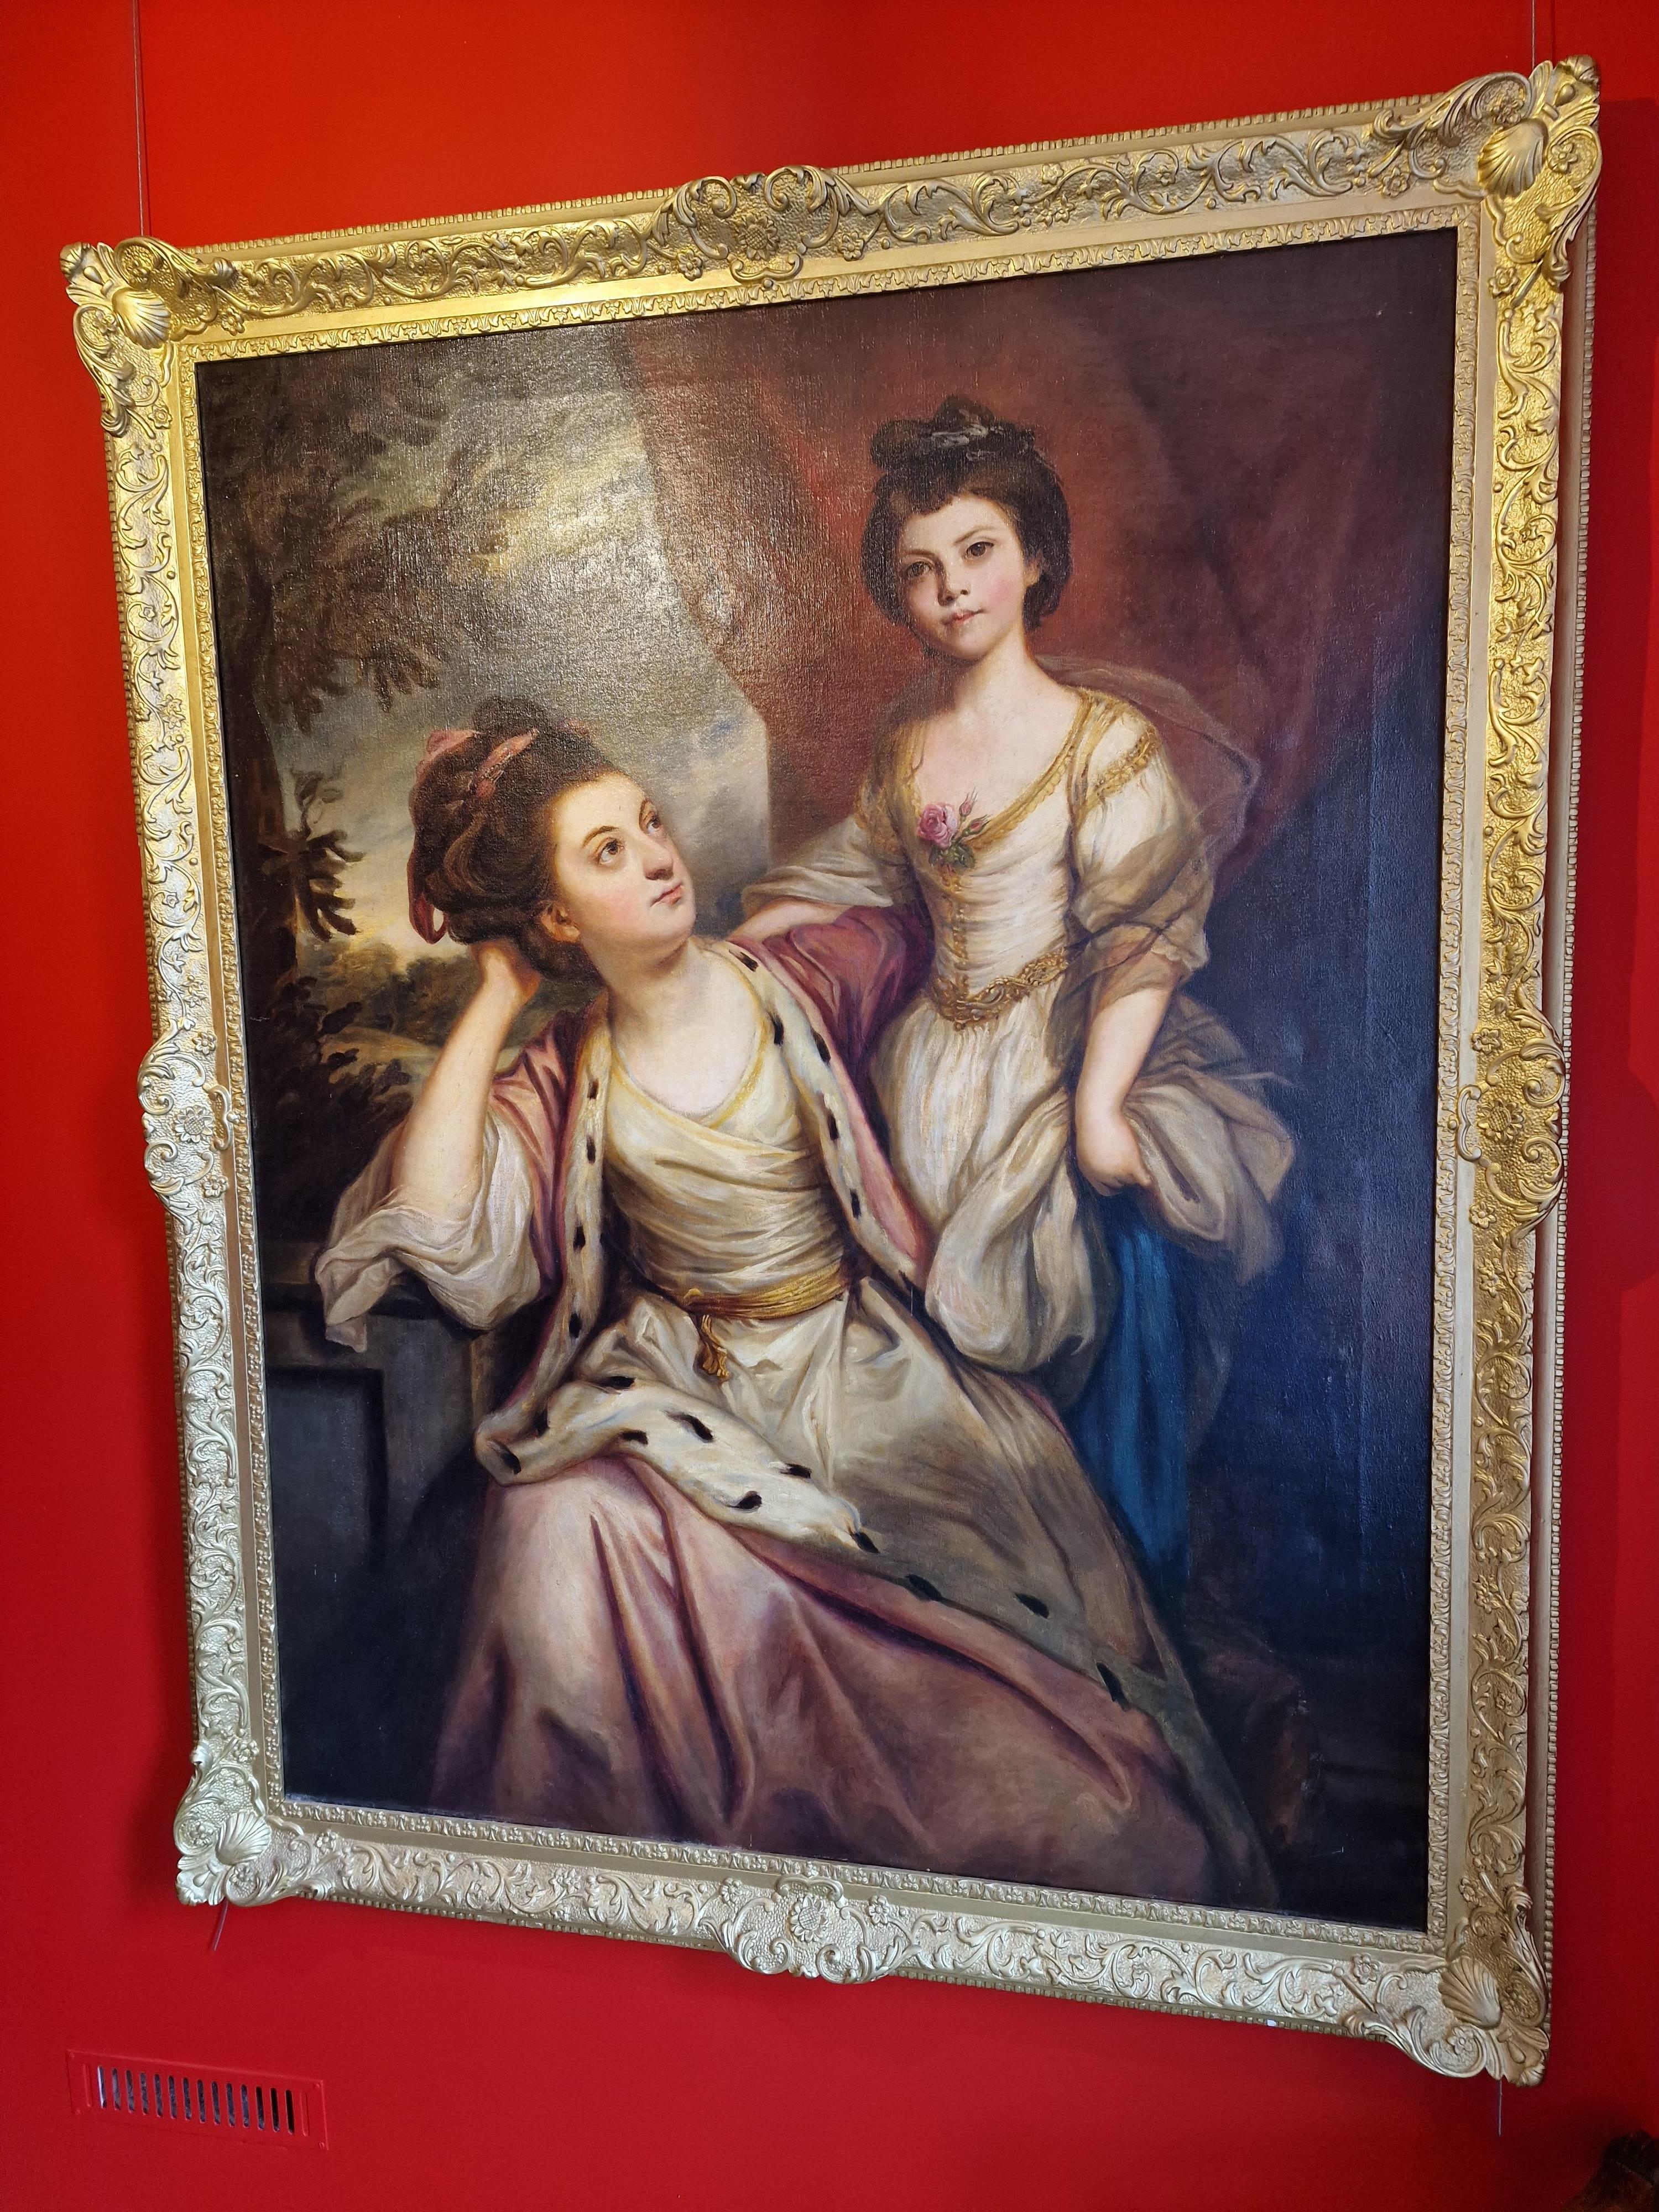 After SIR JOSHUA REYNOLDS
(1723 -1792)
Portrait of Mrs Boone and her Daughter
Oil on Canvas
Canvas Size : 55.25 x 43.25 inches (140 x 110 cms)
Framed size : 62 x 50 inches (157.5 x 127 cms)
Provenance : Private Collection, France

This present